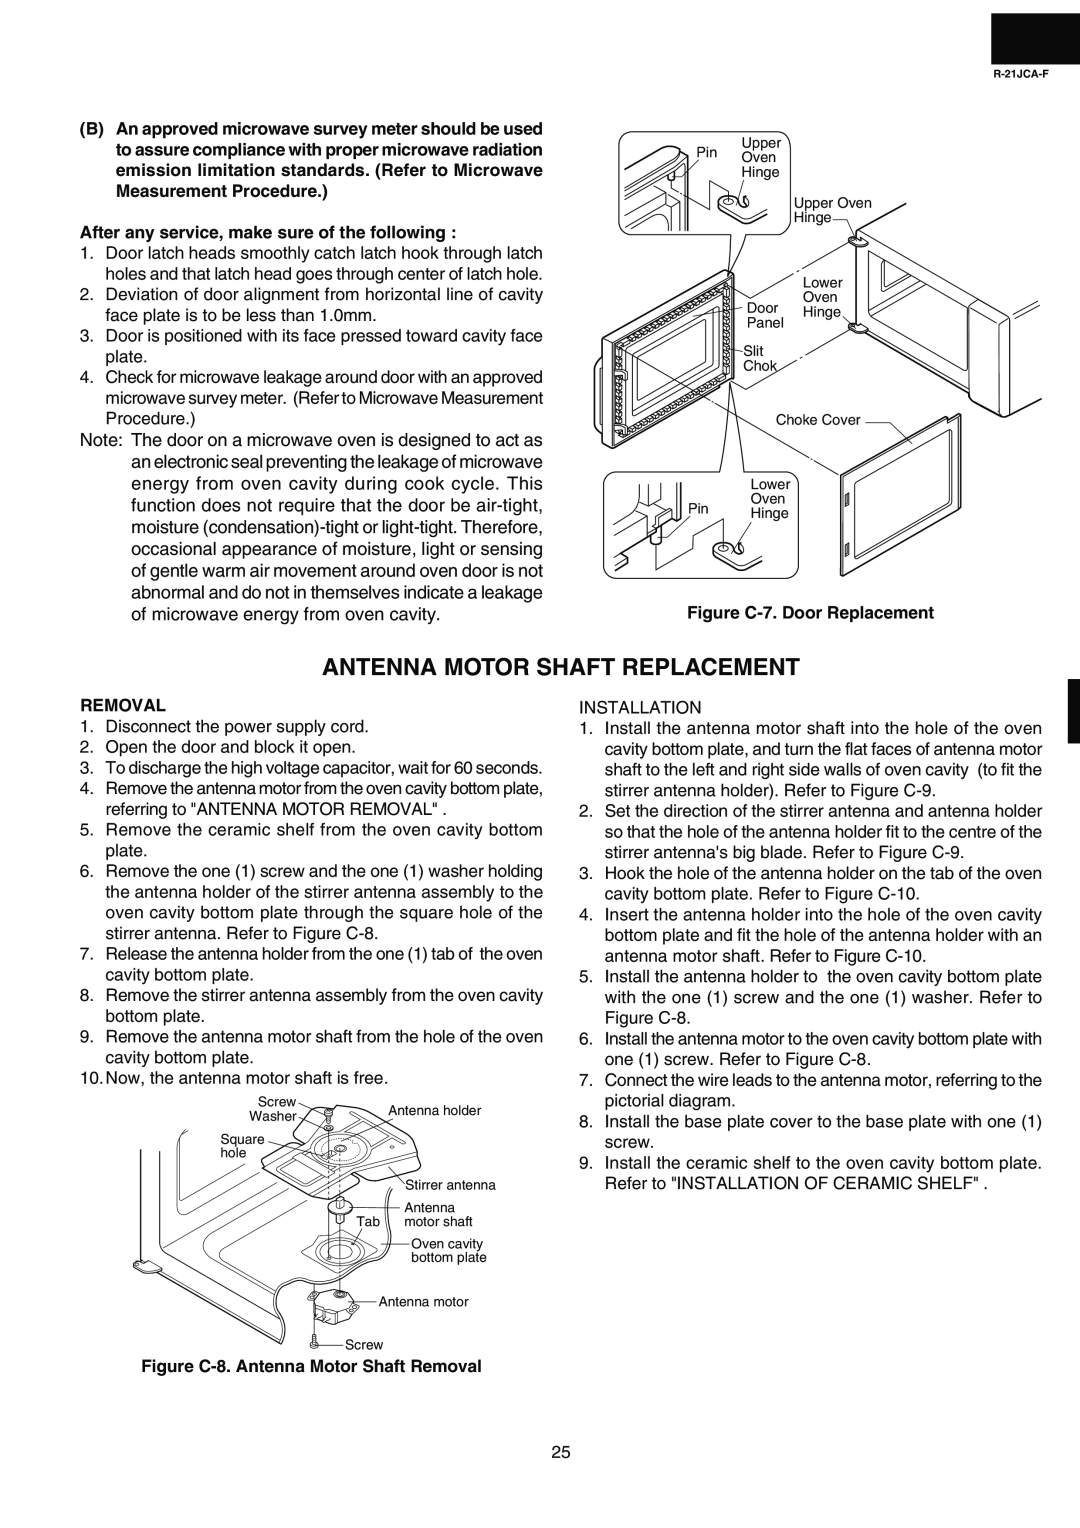 Sharp R-21JCA-F service manual Antenna Motor Shaft Replacement, After any service, make sure of the following, Removal 